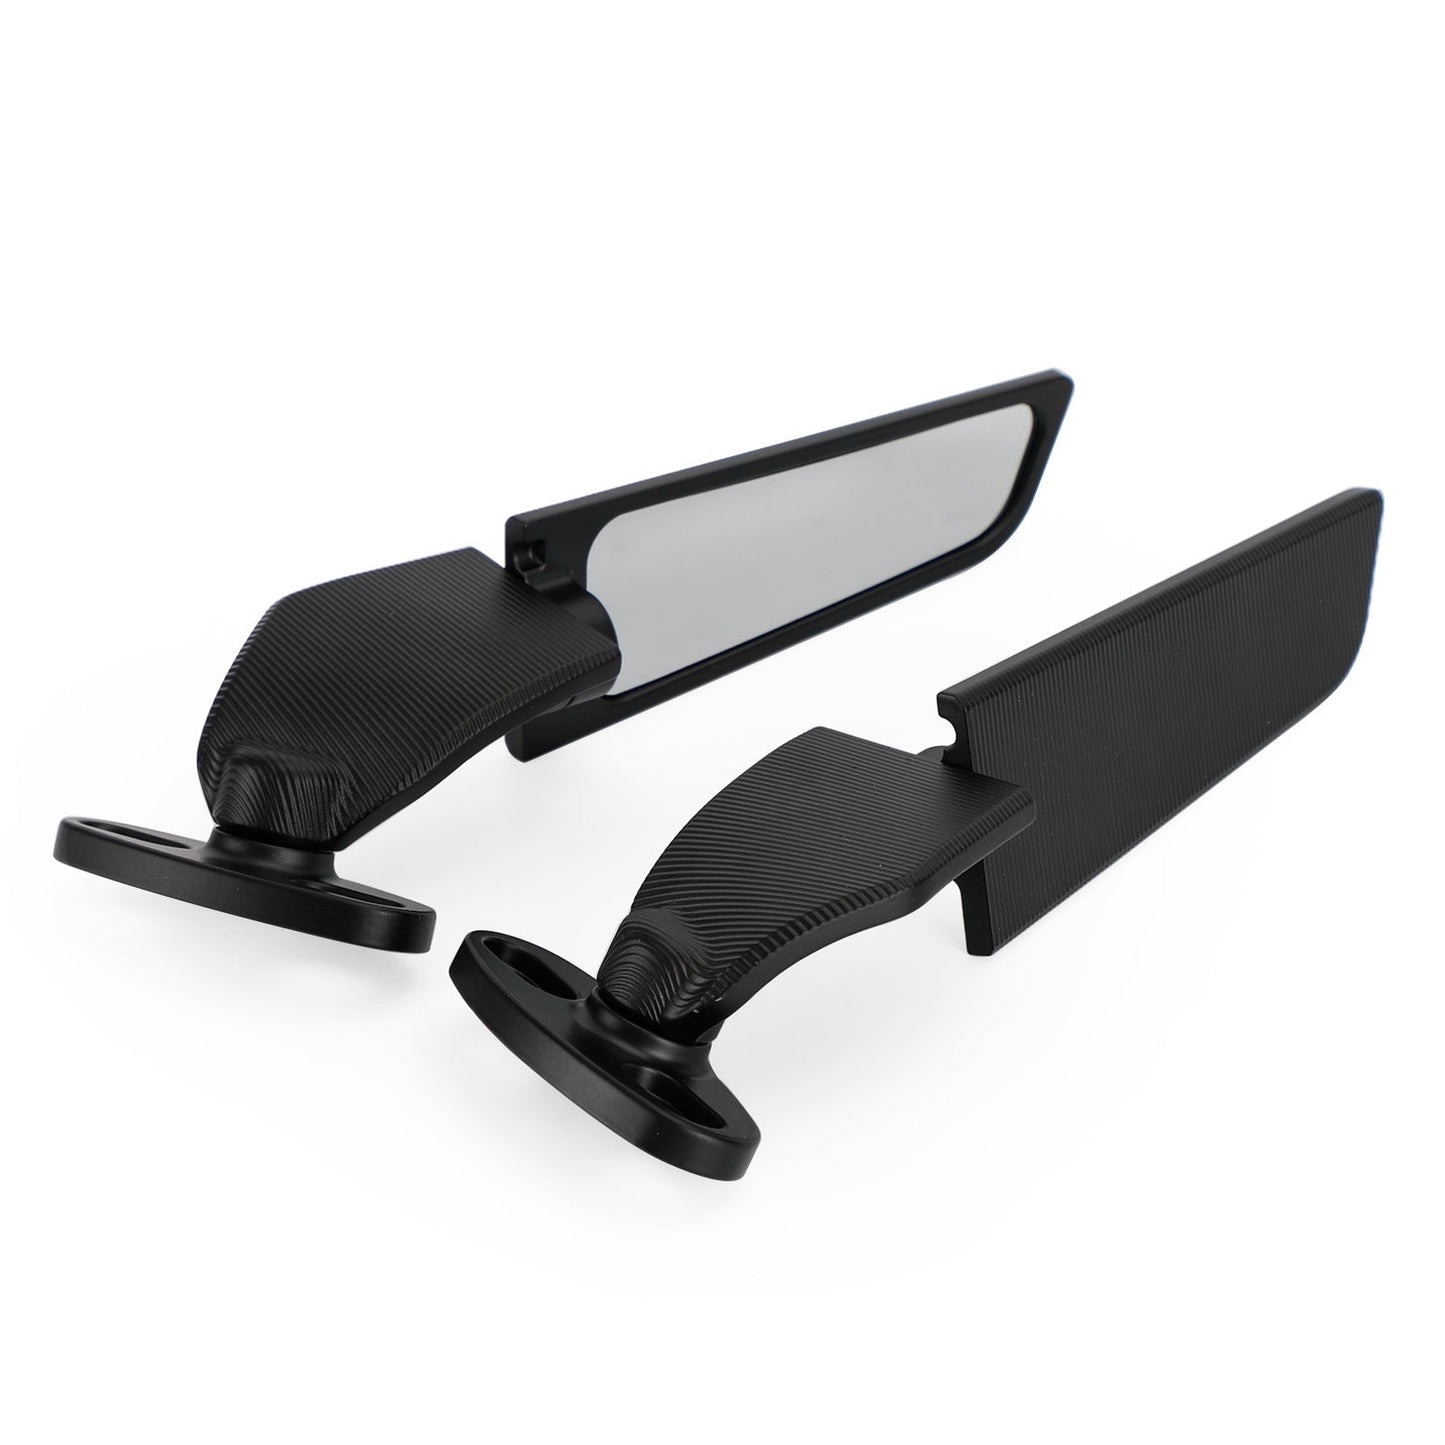 Adjustable Wing Fin Rearview Mirrors For Honda RVT1000R VTR1000 SP 2000-2006